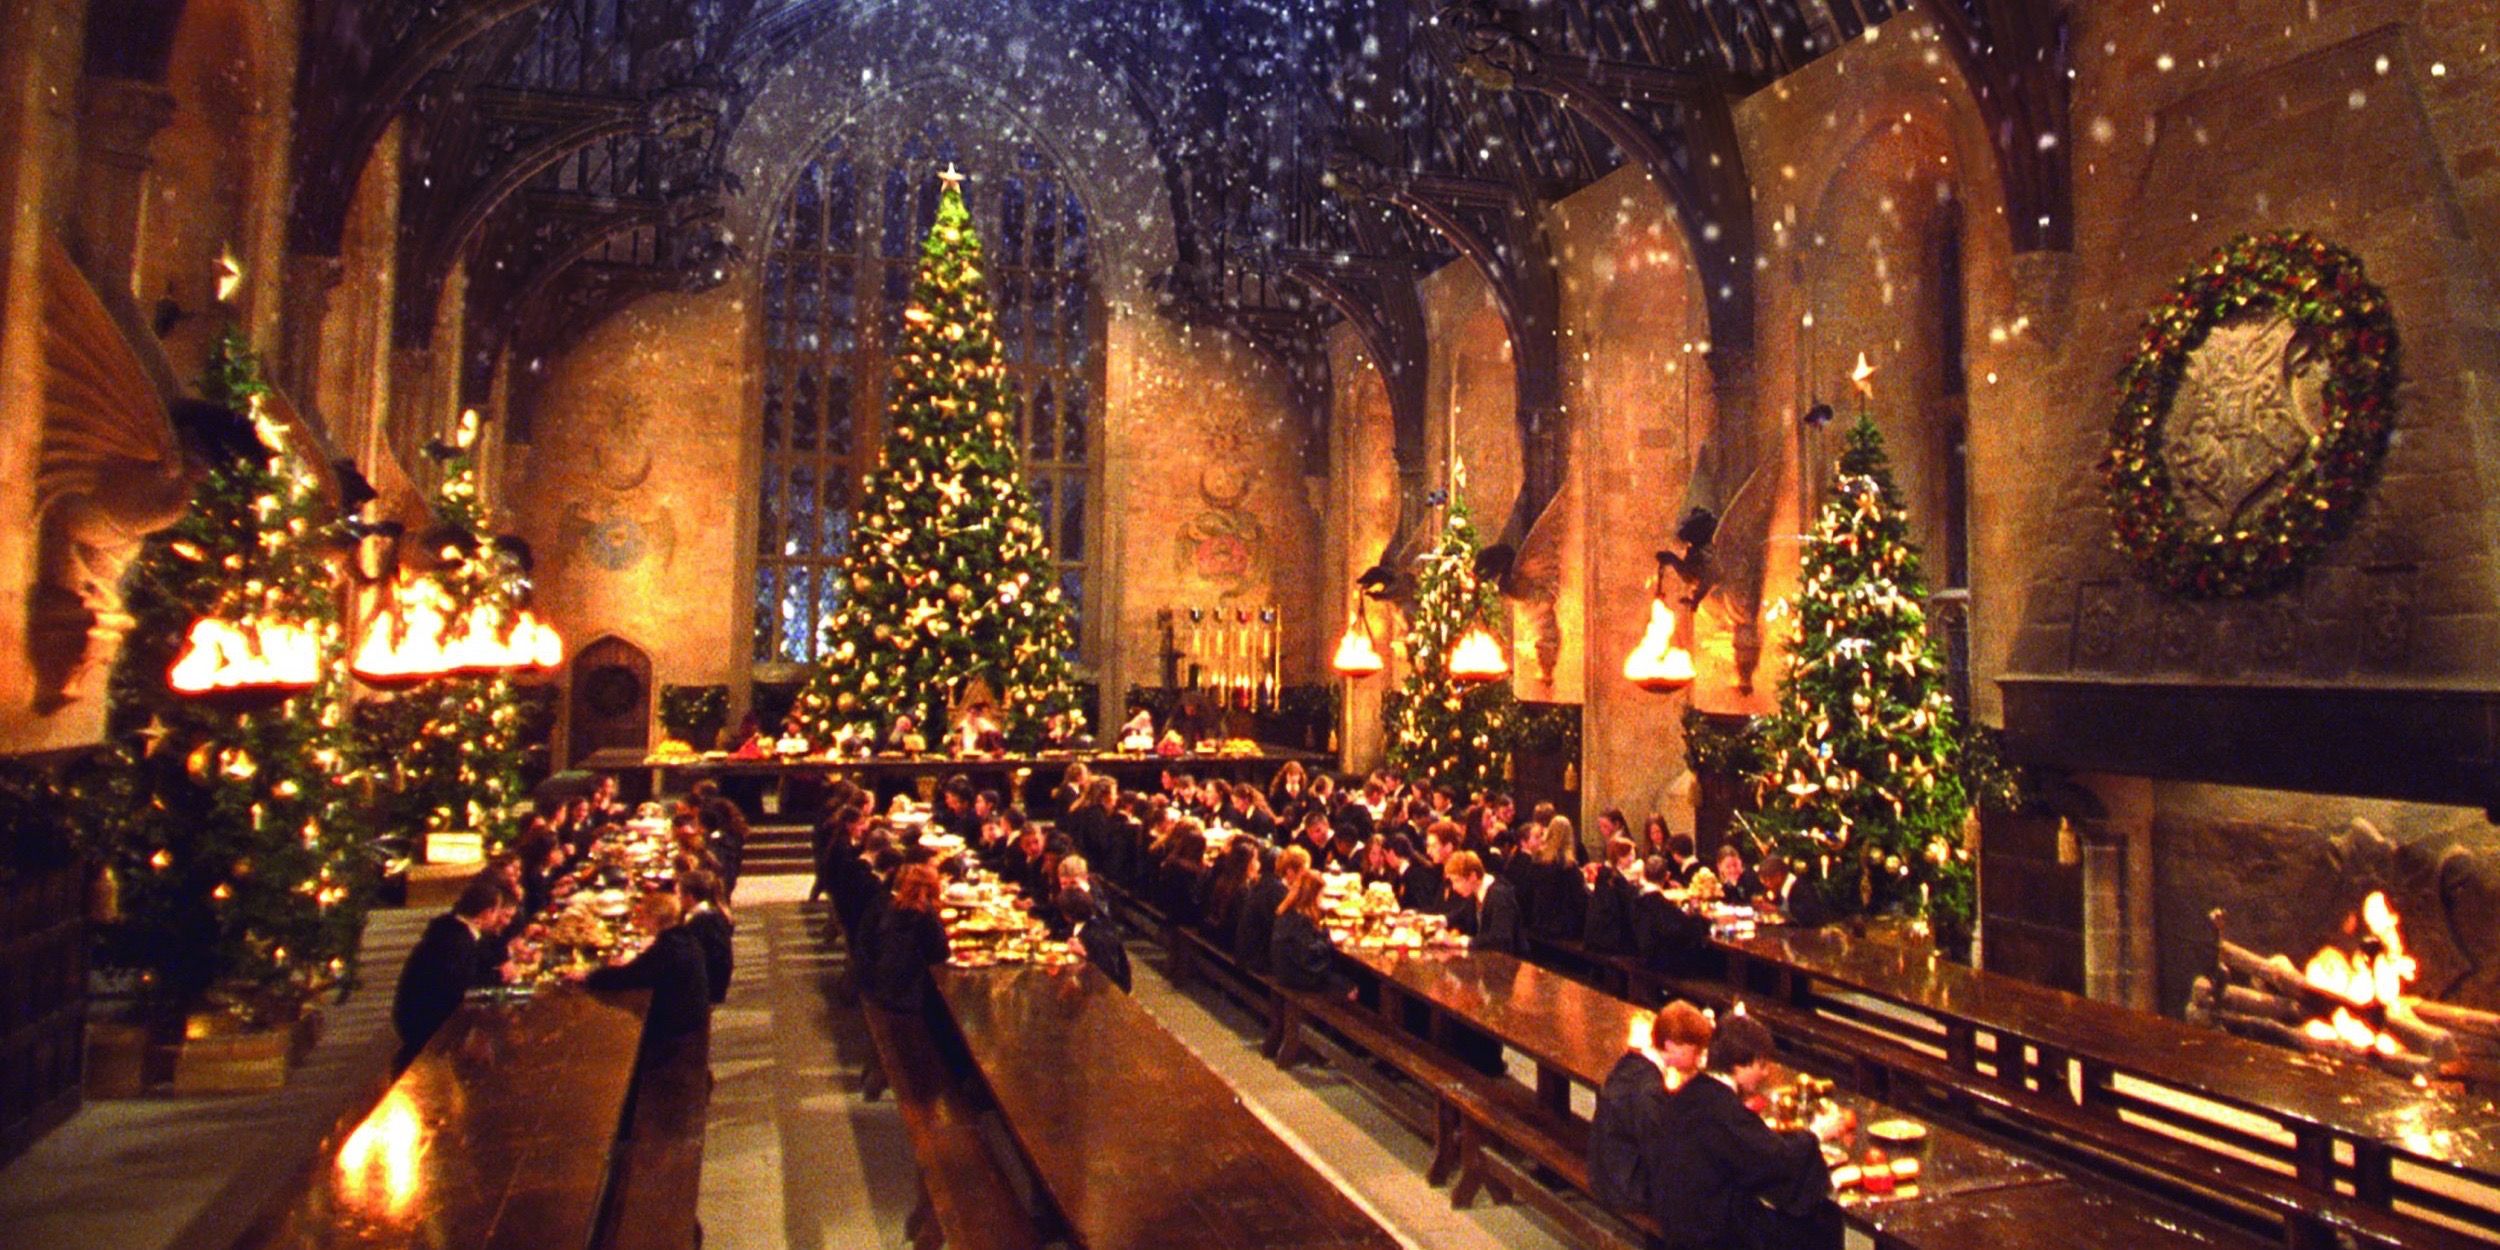 Christmas at the Great Hall in Hogwarts seen in Sorcerer's Stone